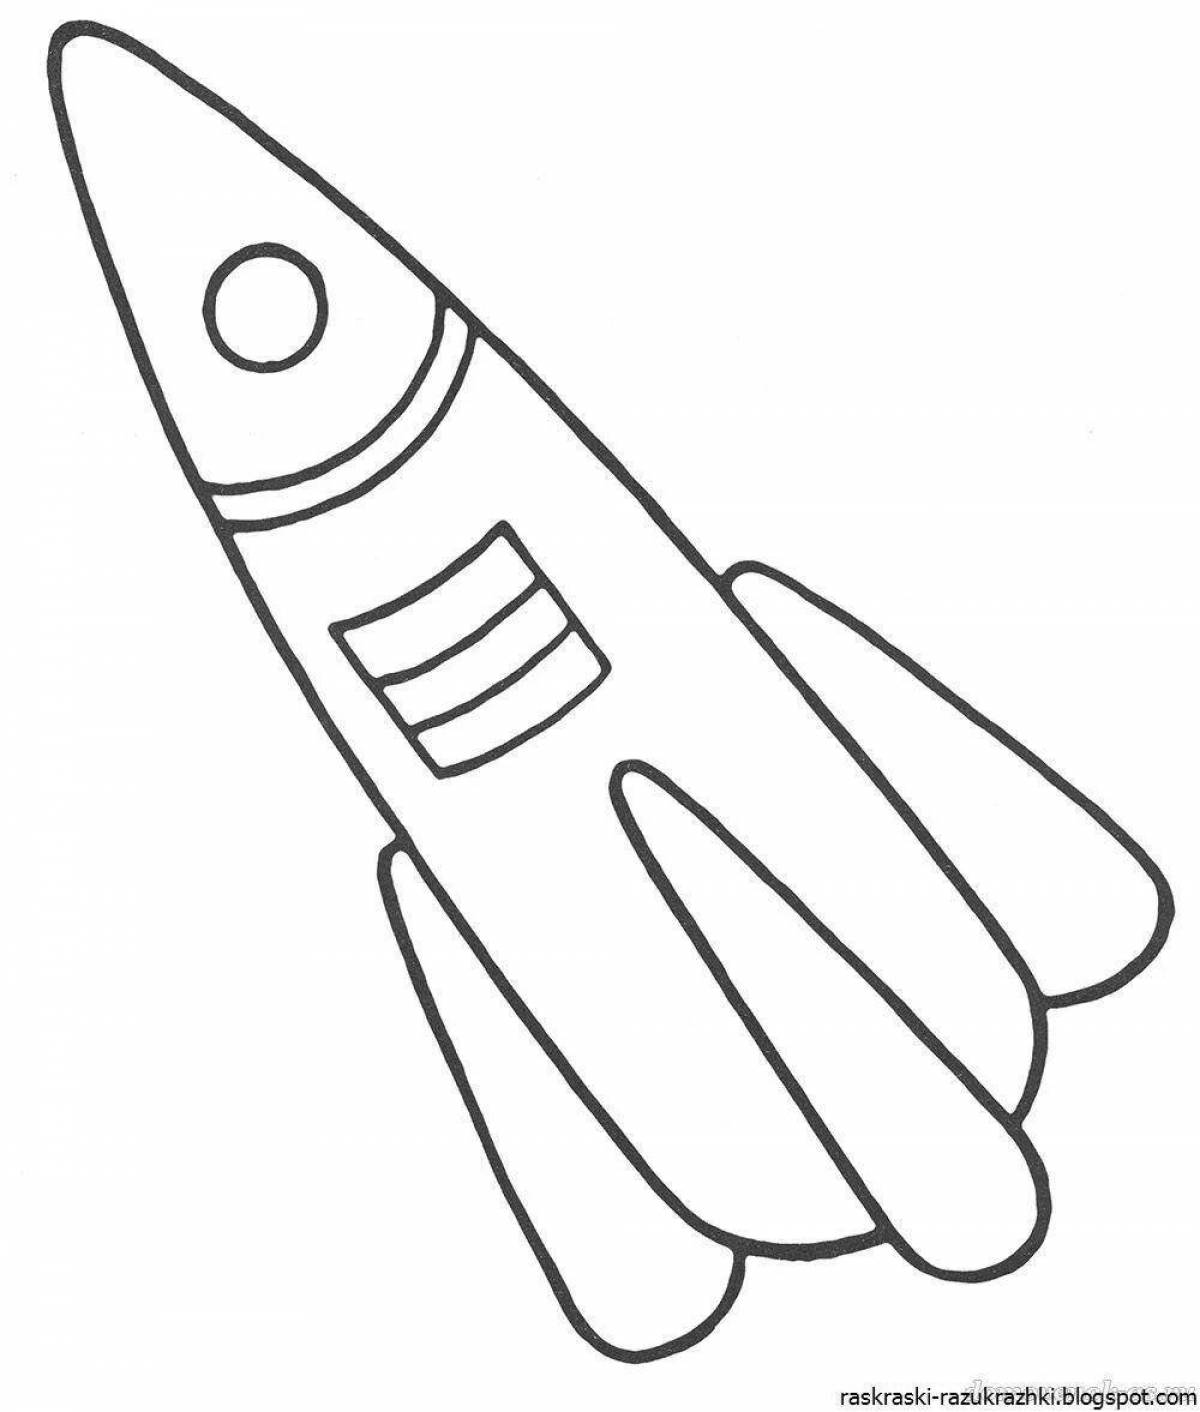 Amazing rocket coloring book for kids